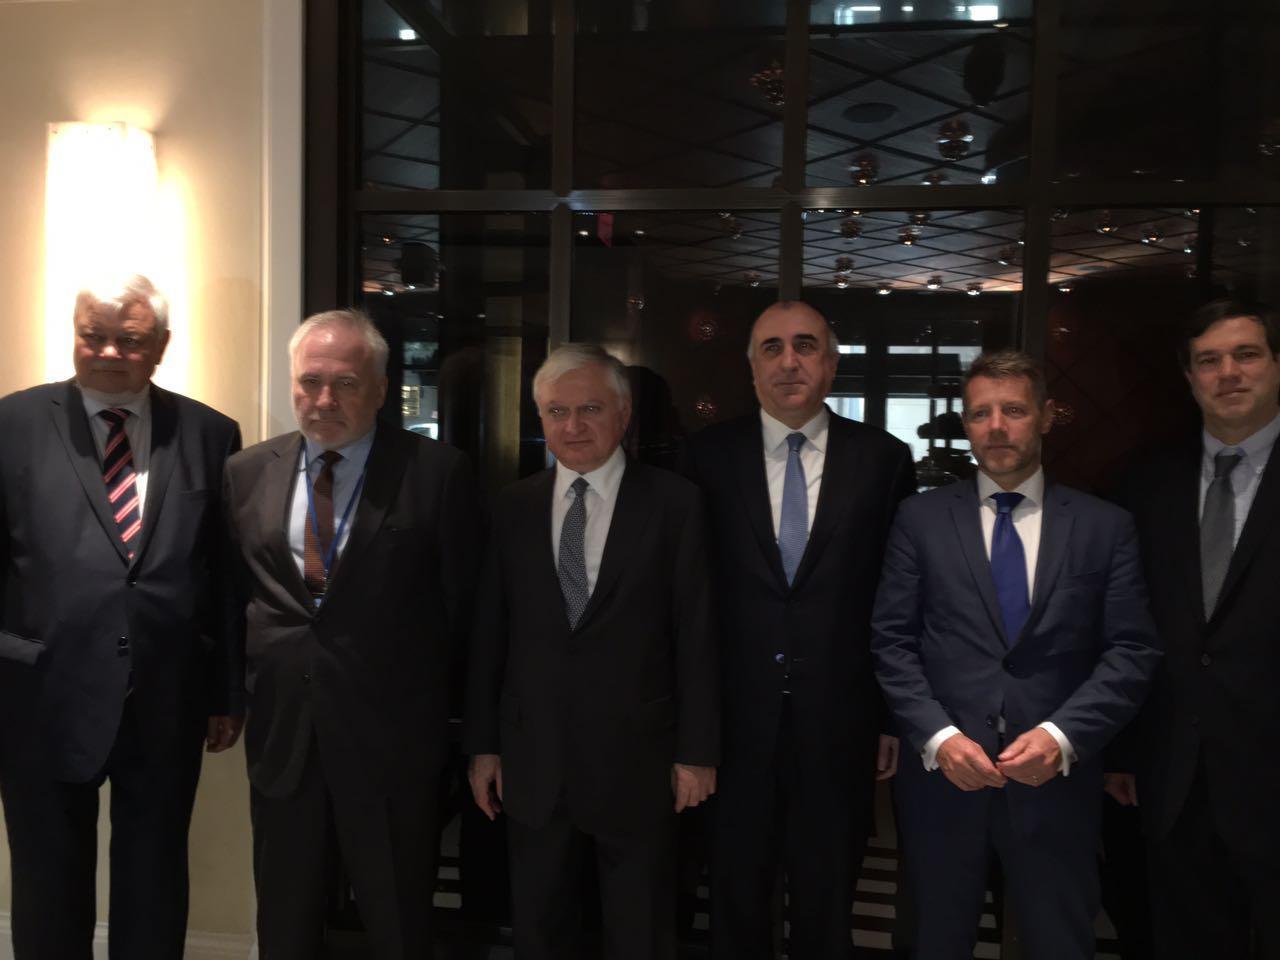 Substantial negotiations on nagorno-karabakh conflict settlement discussed in New York (UPDATED)